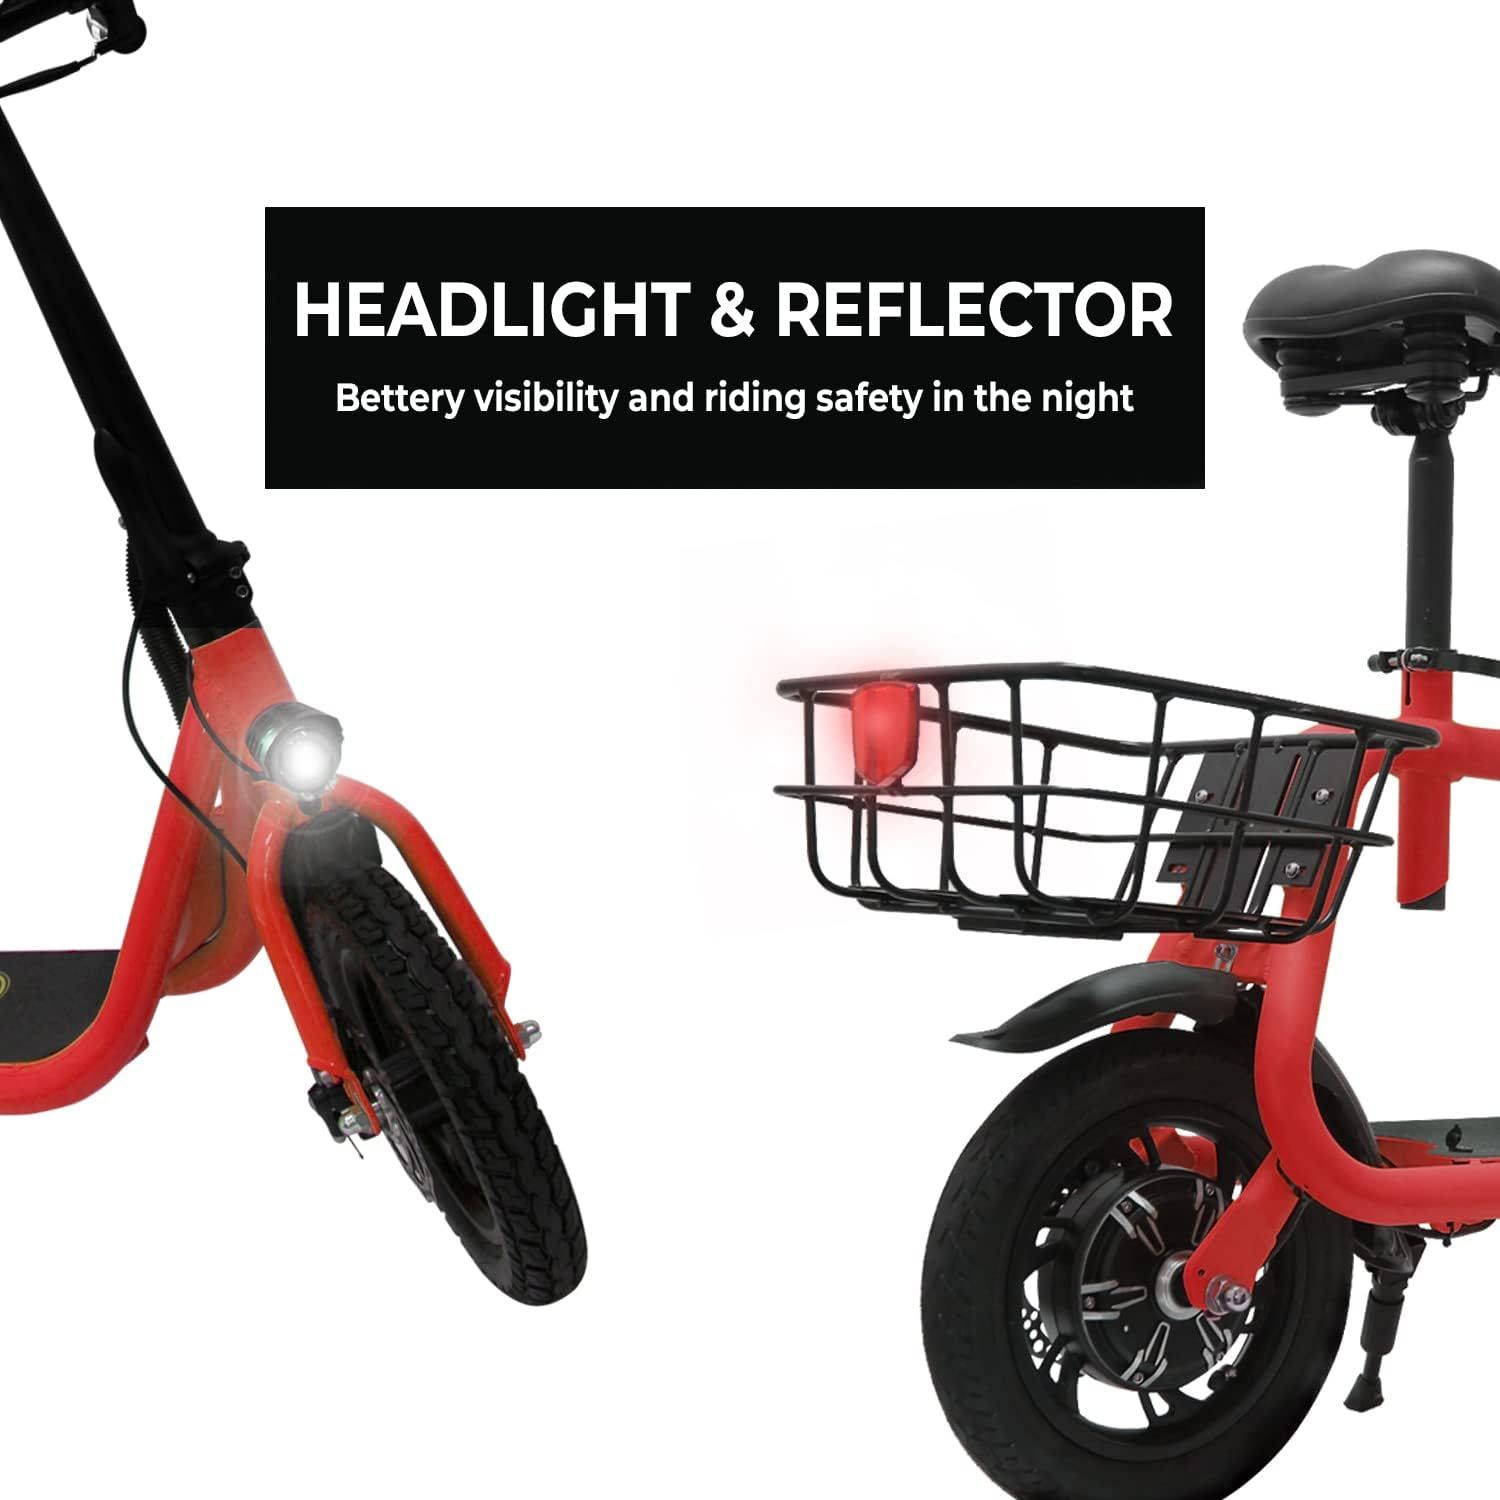 450 COMMUTER ADULT ELECTRIC SCOOTER HEADLIGHT